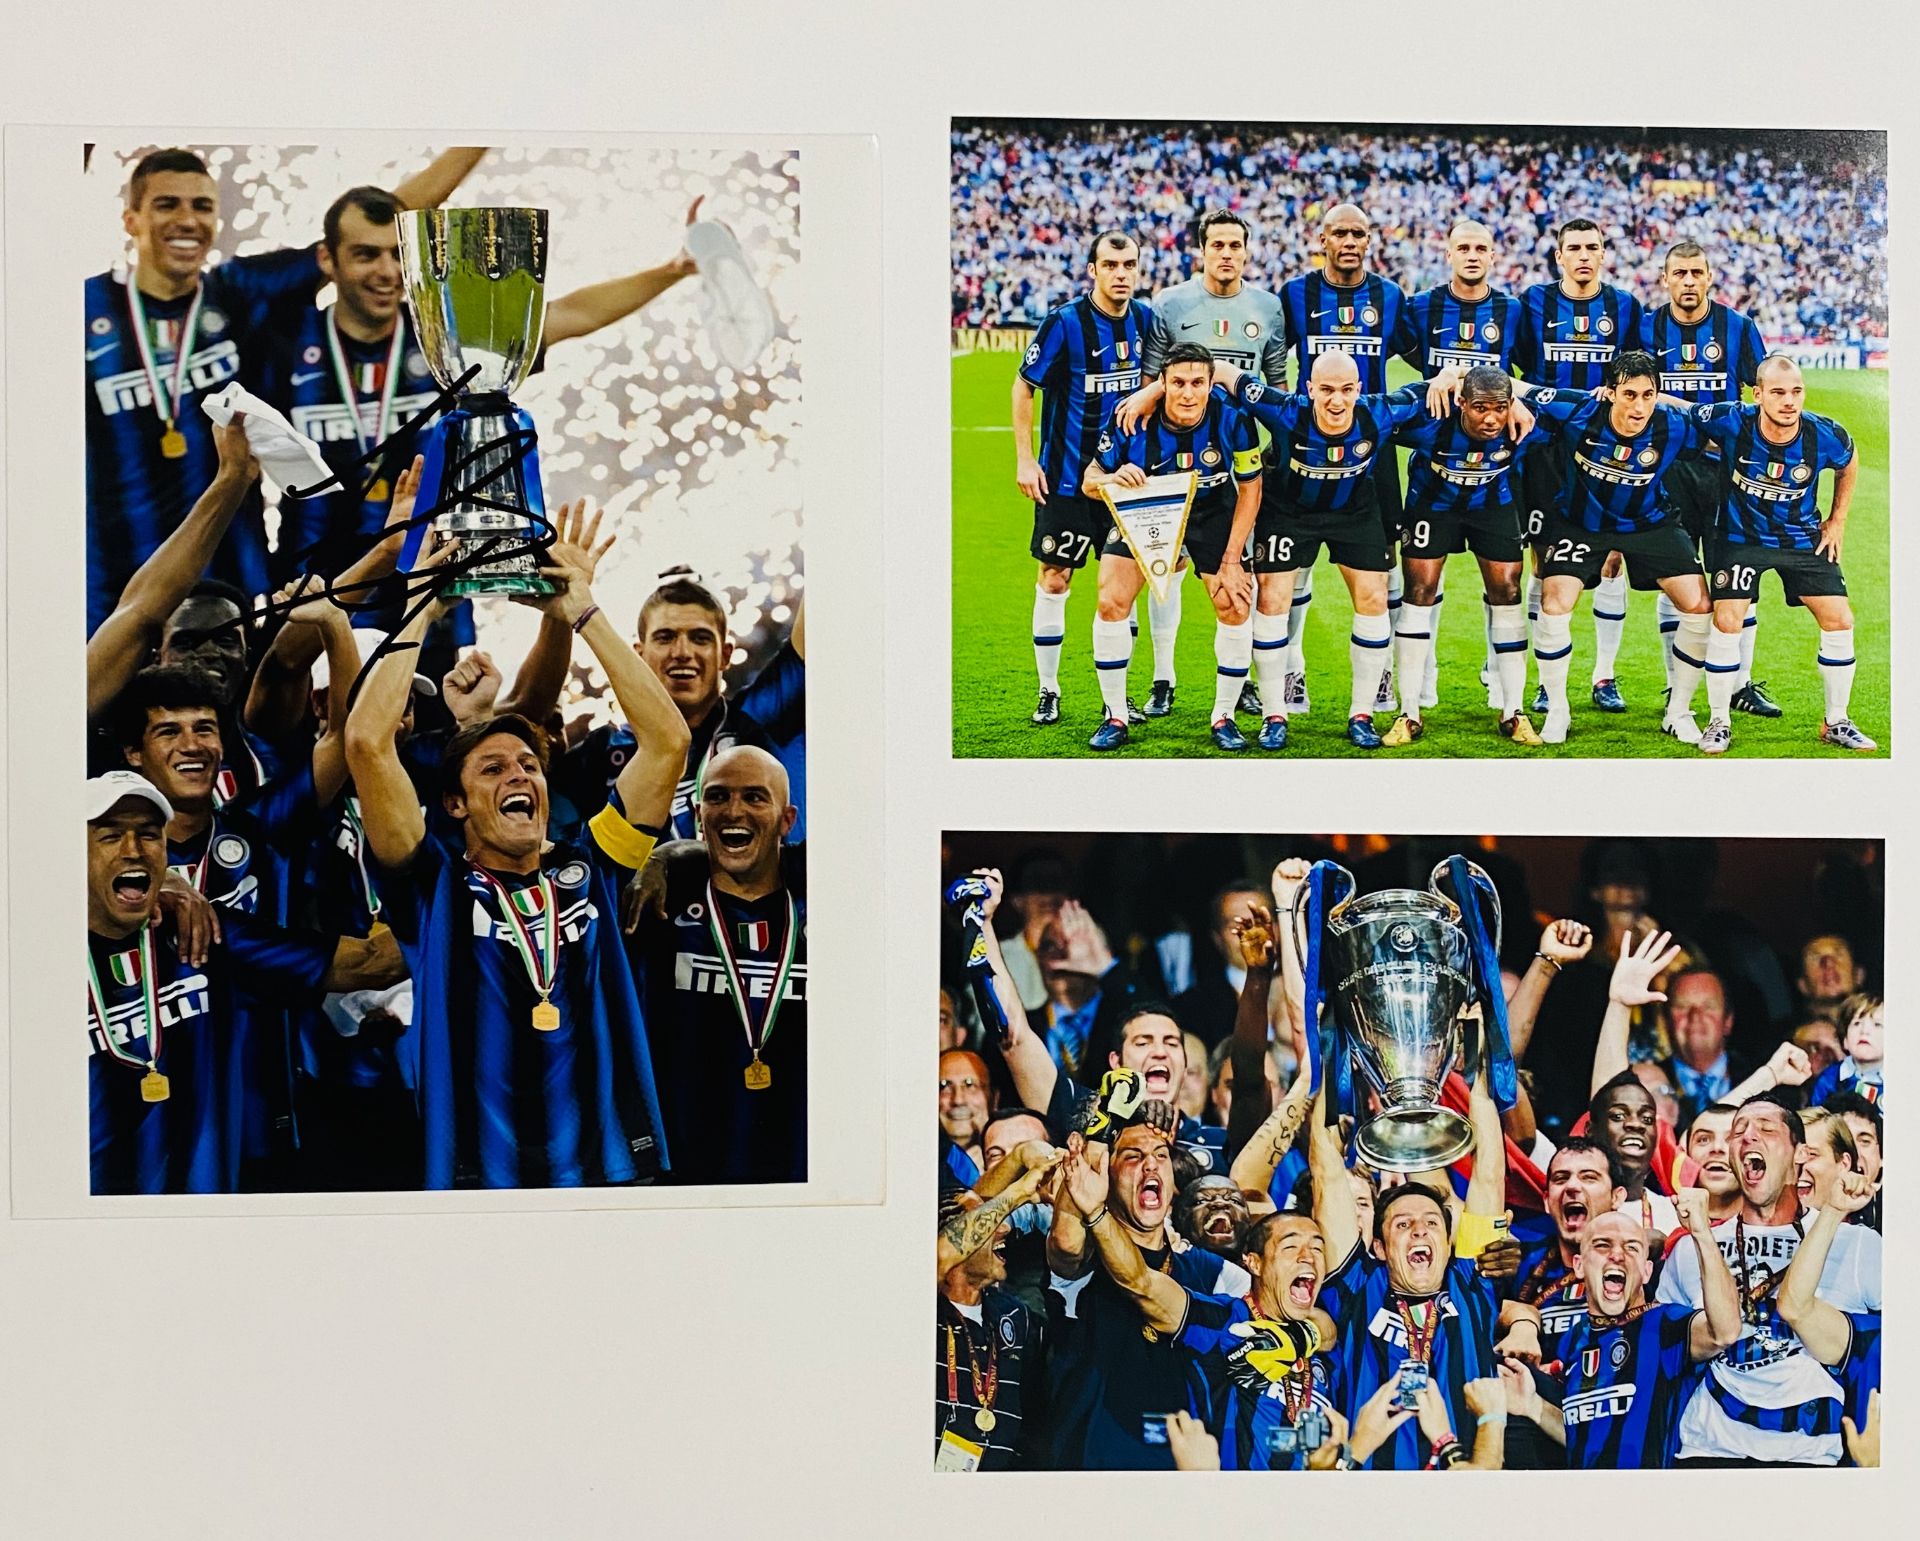 Inter Milan 2010 Champions League winners signed jersey - Image 3 of 3